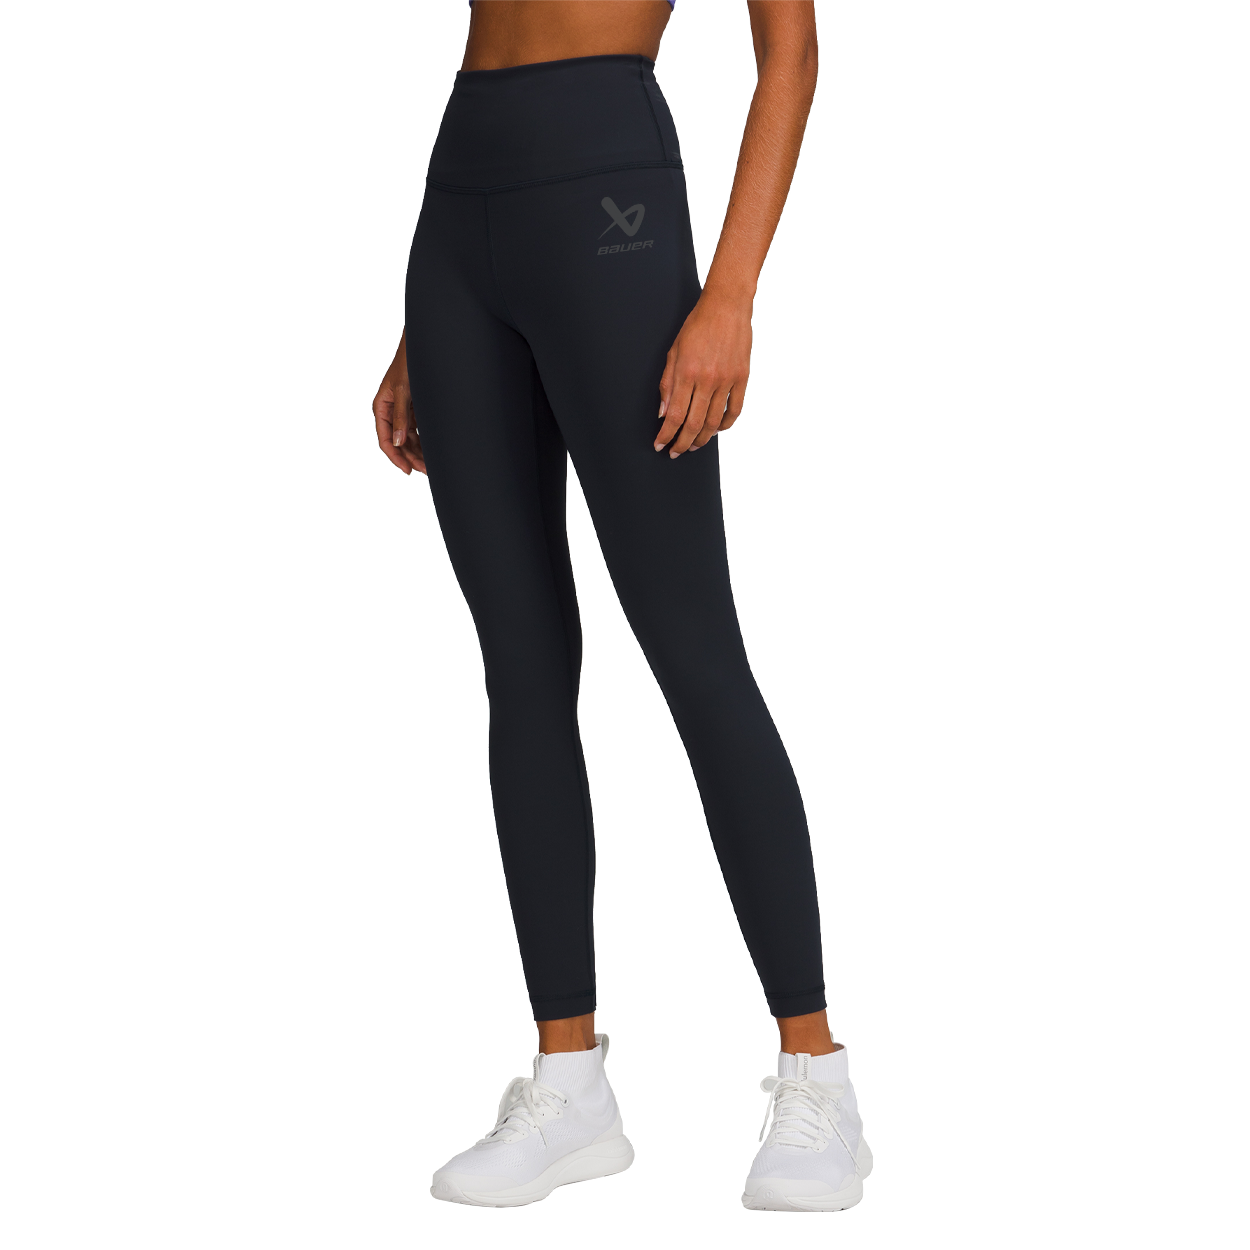 Womens Push Up Ideology Yoga Pants Short With Scrunch Design Soft And  Comfortable Gym Leggings For Yoga And Training Black From Landong01, $25.55  | DHgate.Com